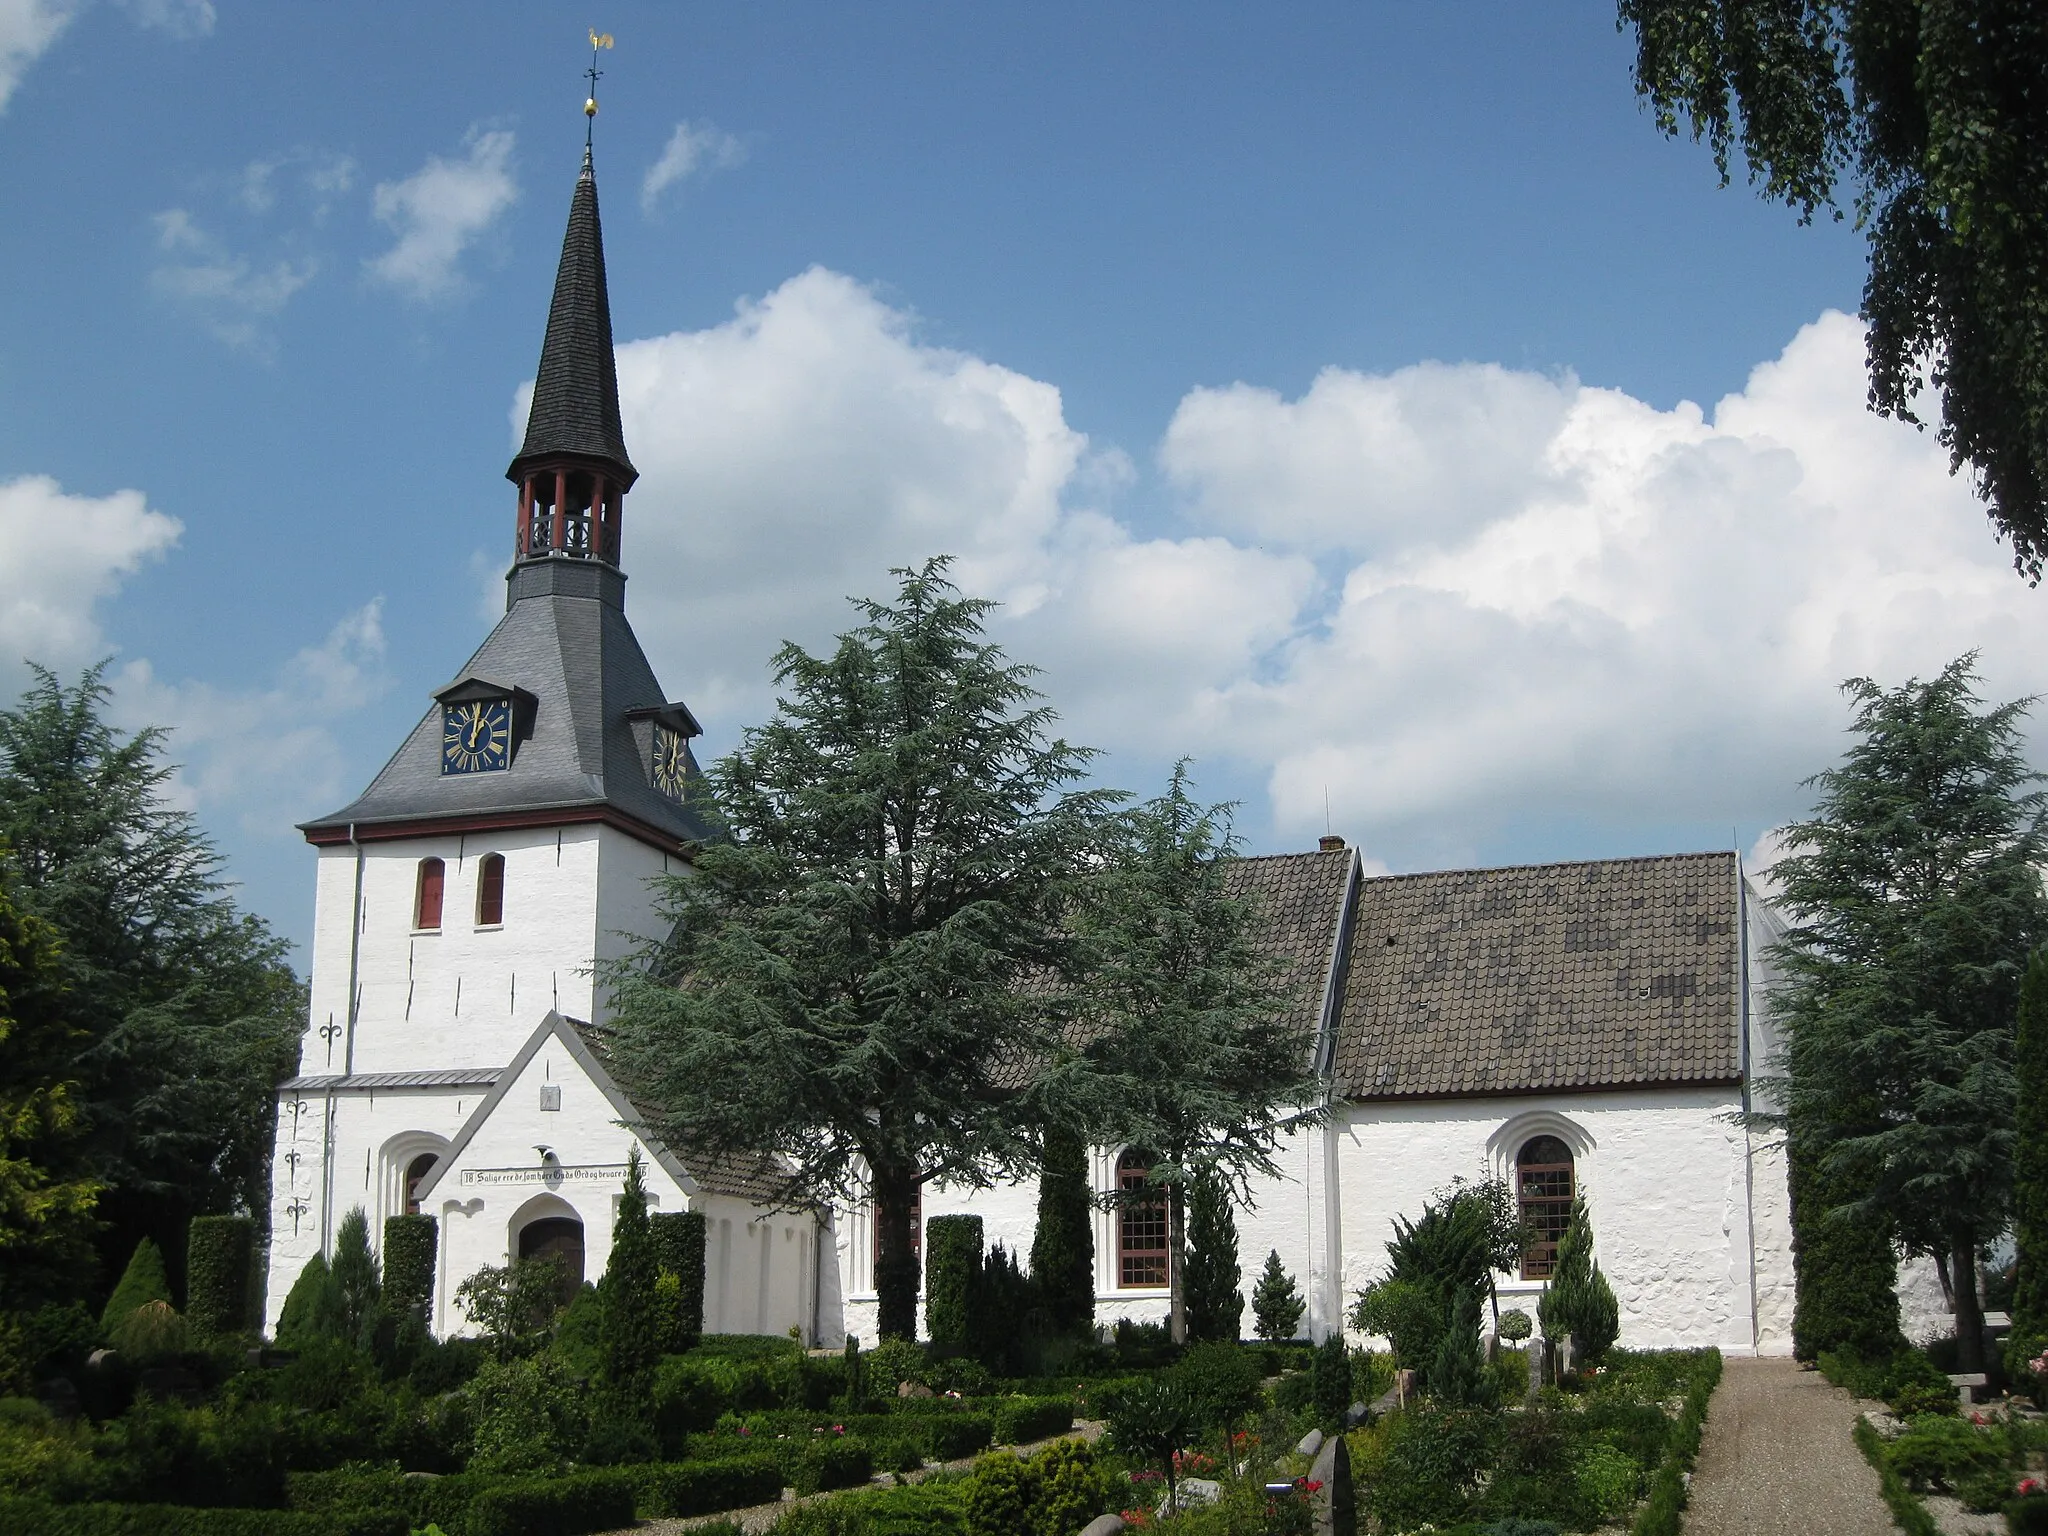 Photo showing: The church "Tinglev Kirke" in the small town "Tinglev". The town is located in Southern Jutland (in south Denmark).